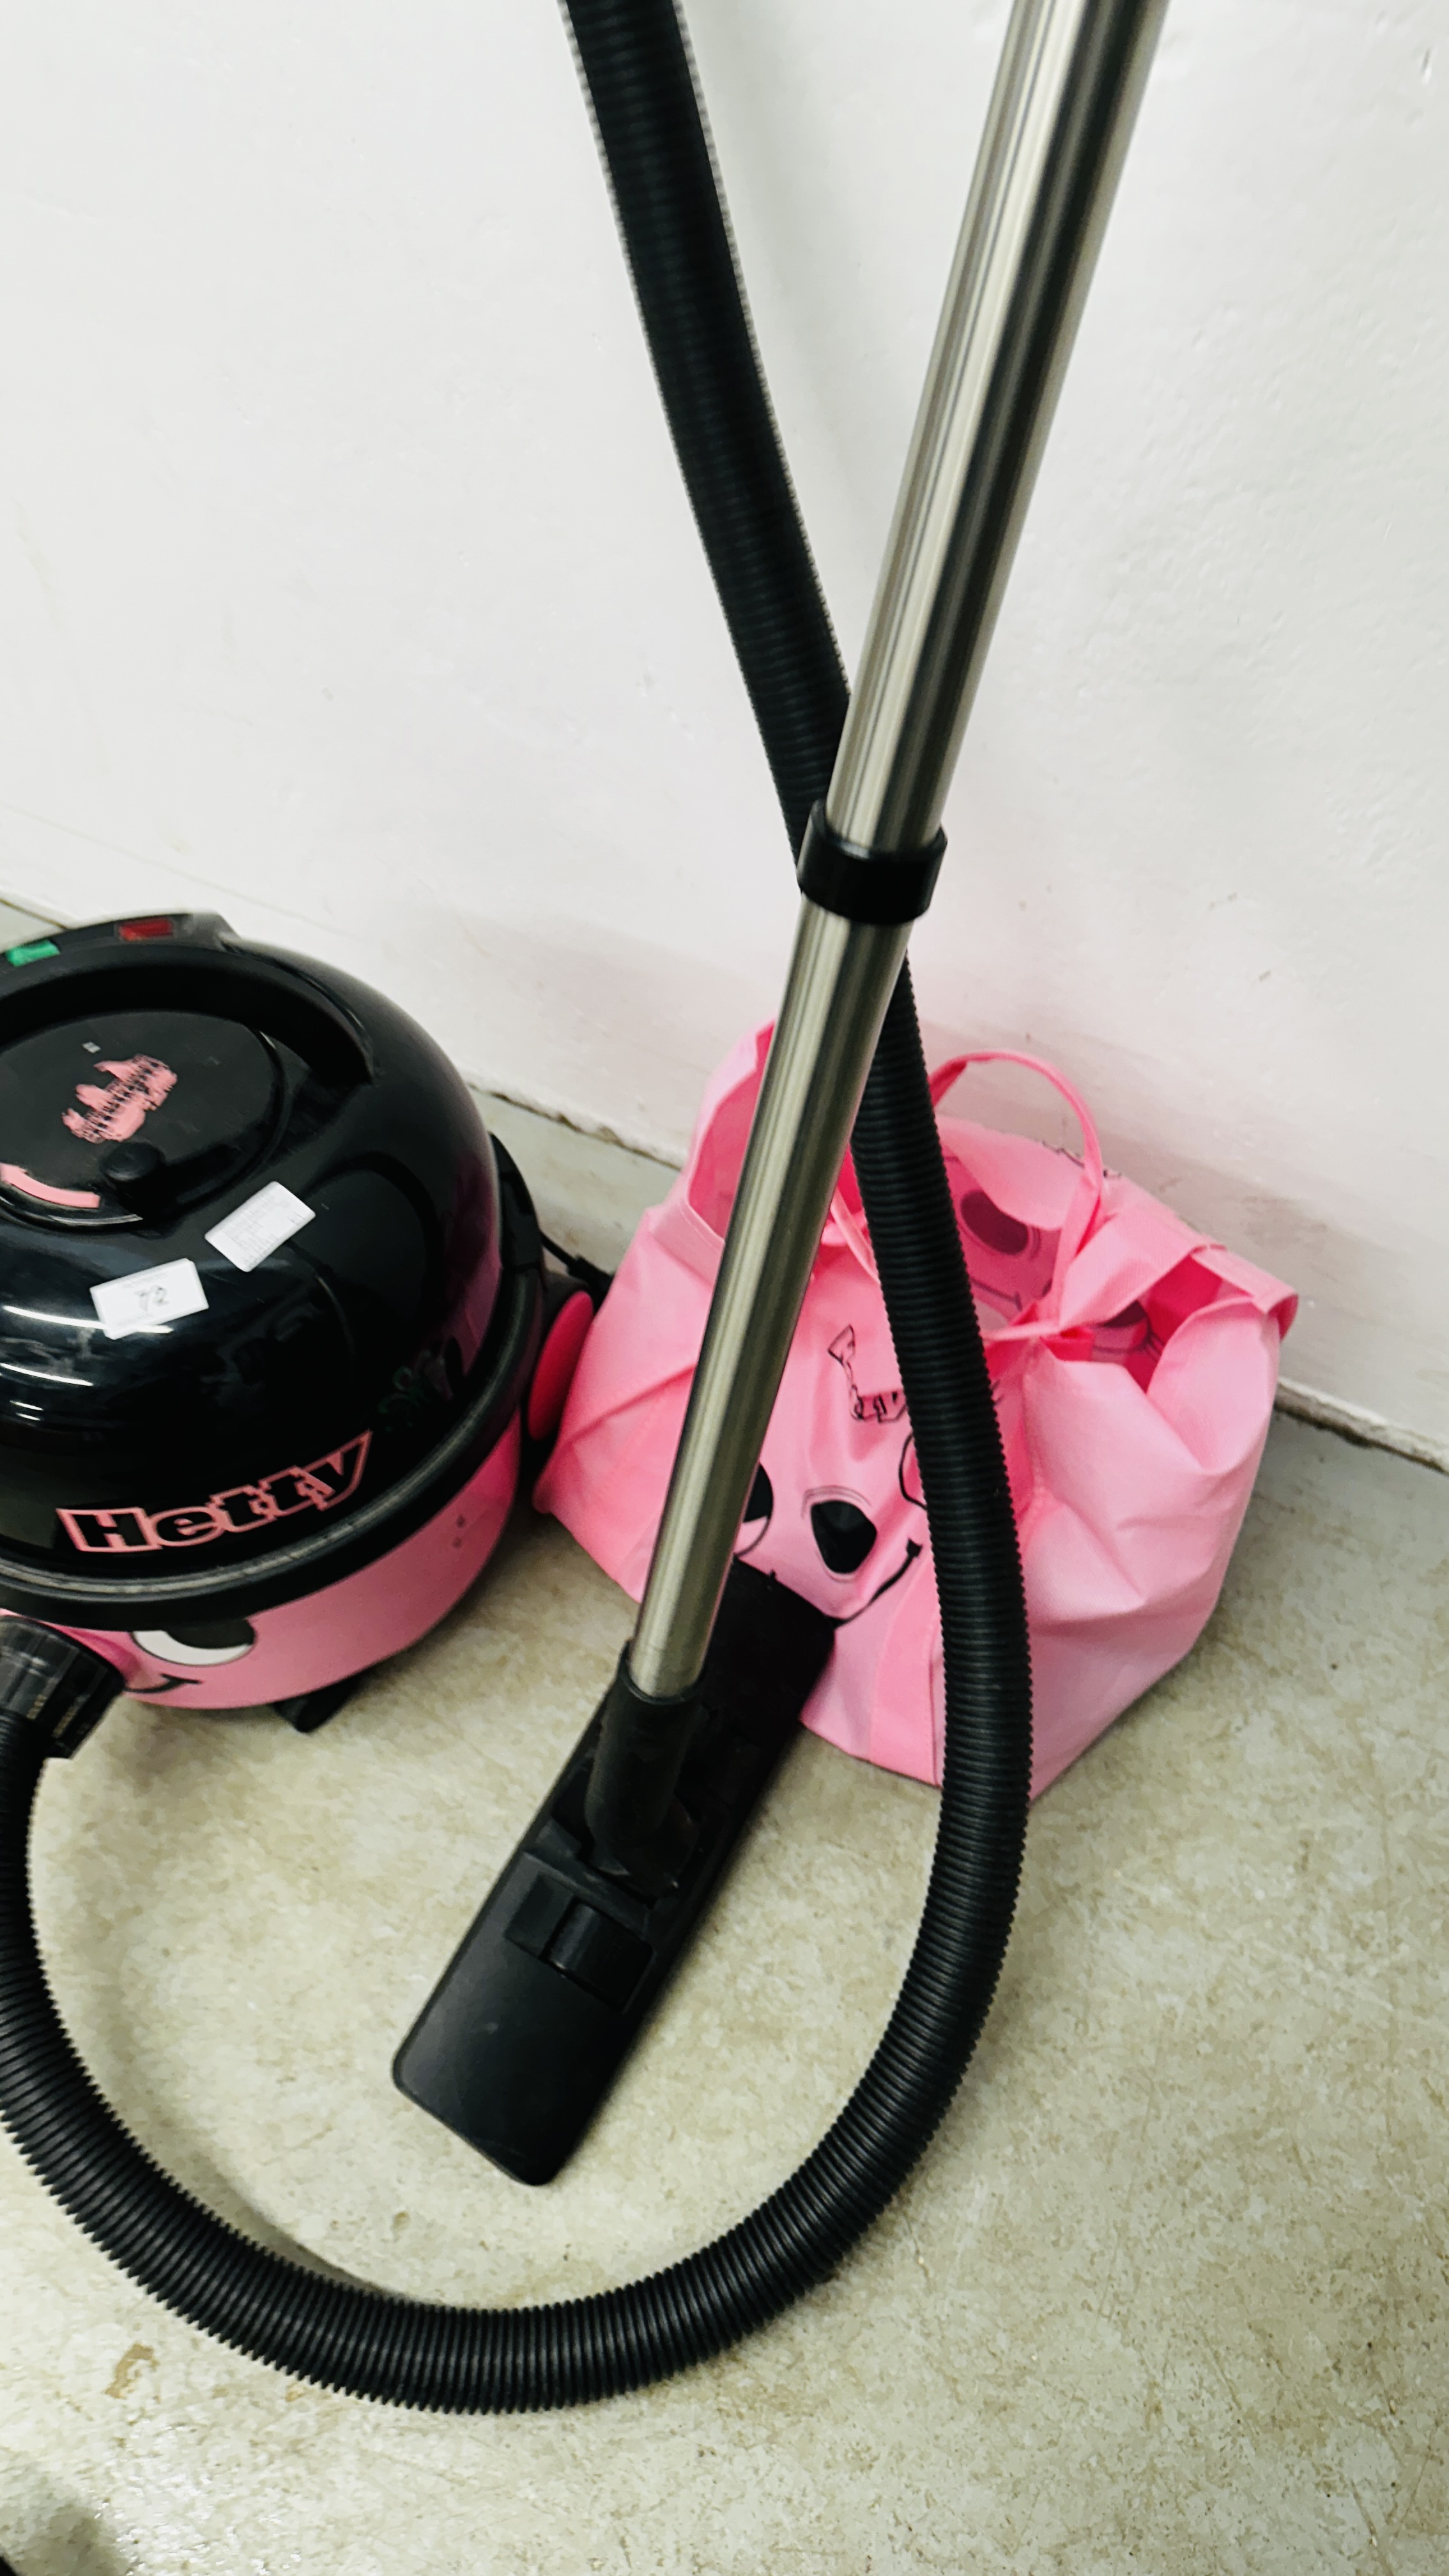 A 'HETTY' NUMATIC VACUUM CLEANER WITH SPARE BAGS AND ACCESSORIES - SOLD AS SEEN. - Image 6 of 7